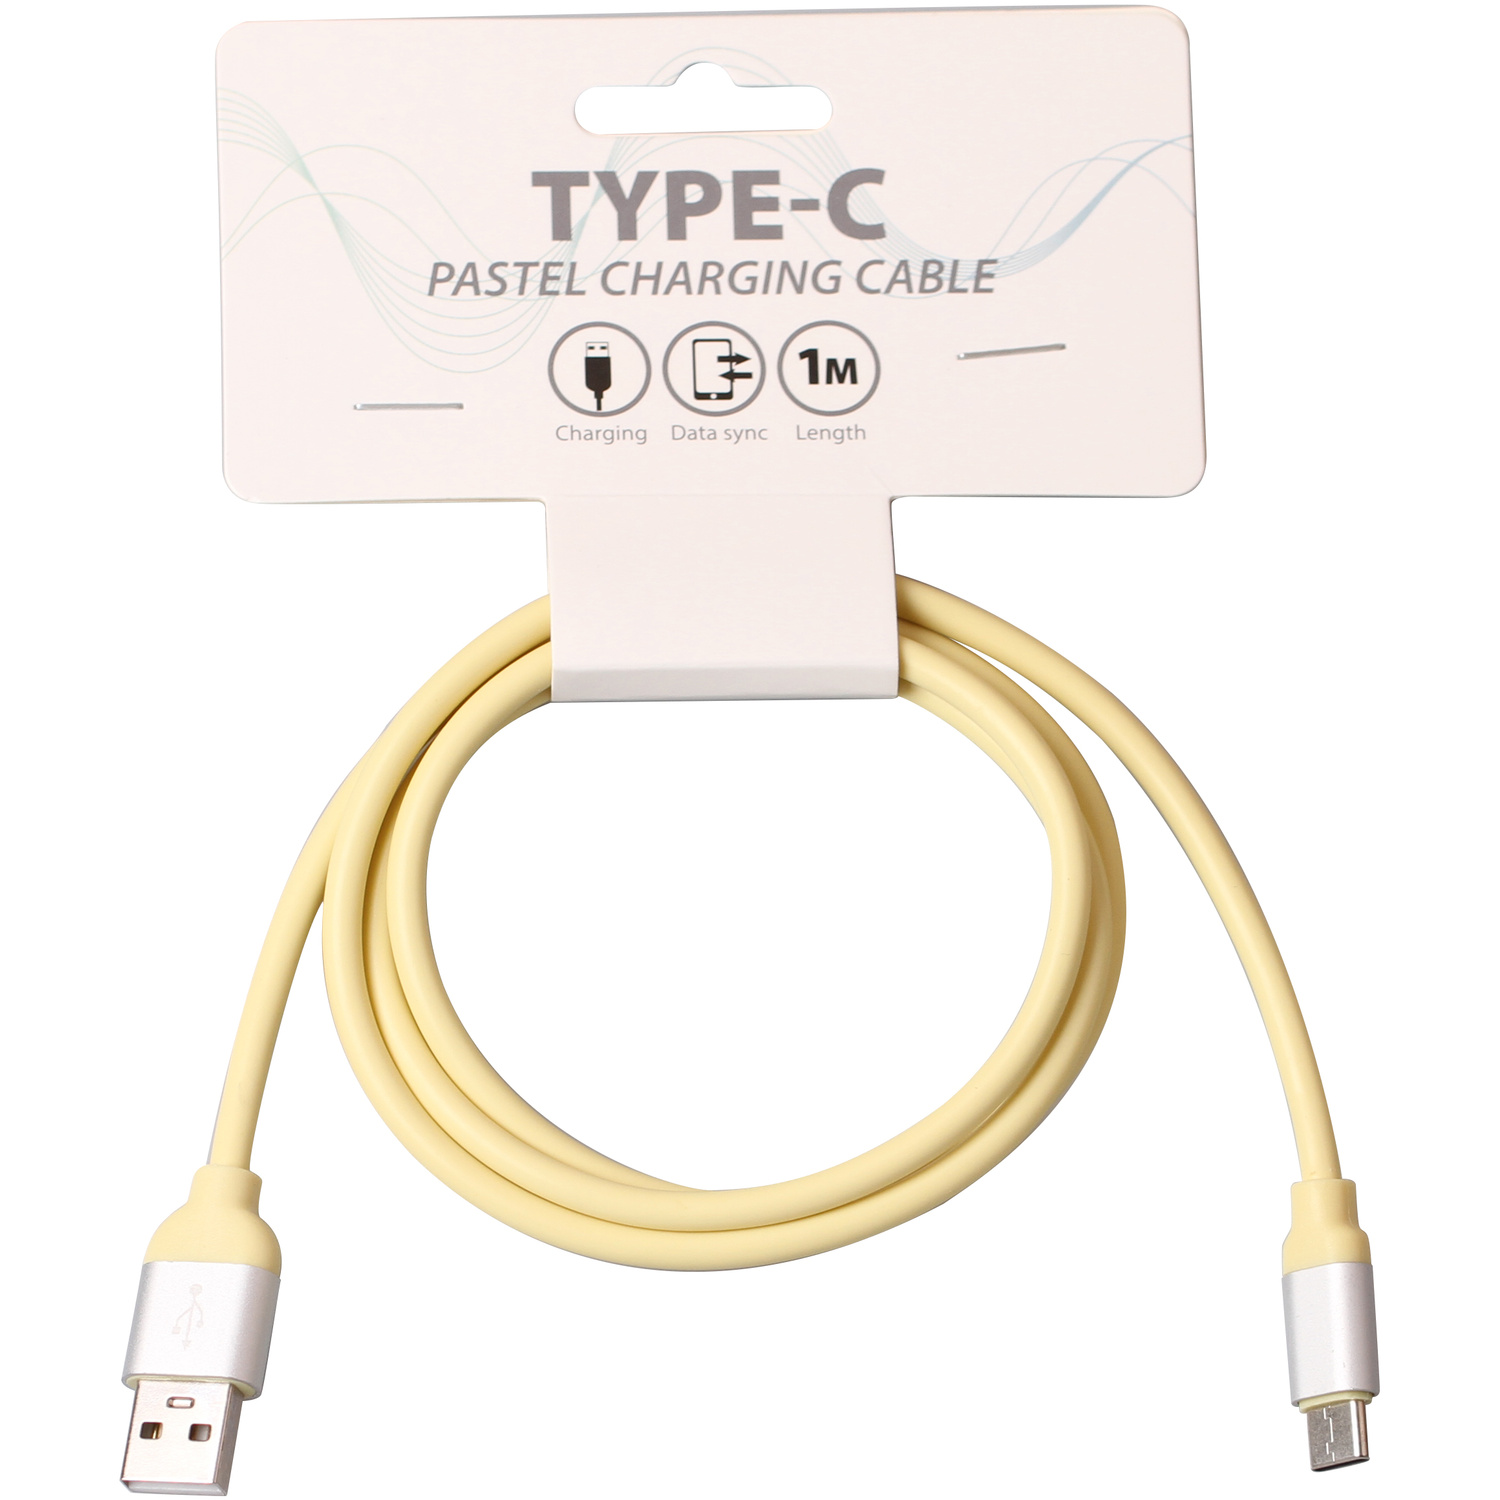 Type-C Pastel Charging Cable Image 3